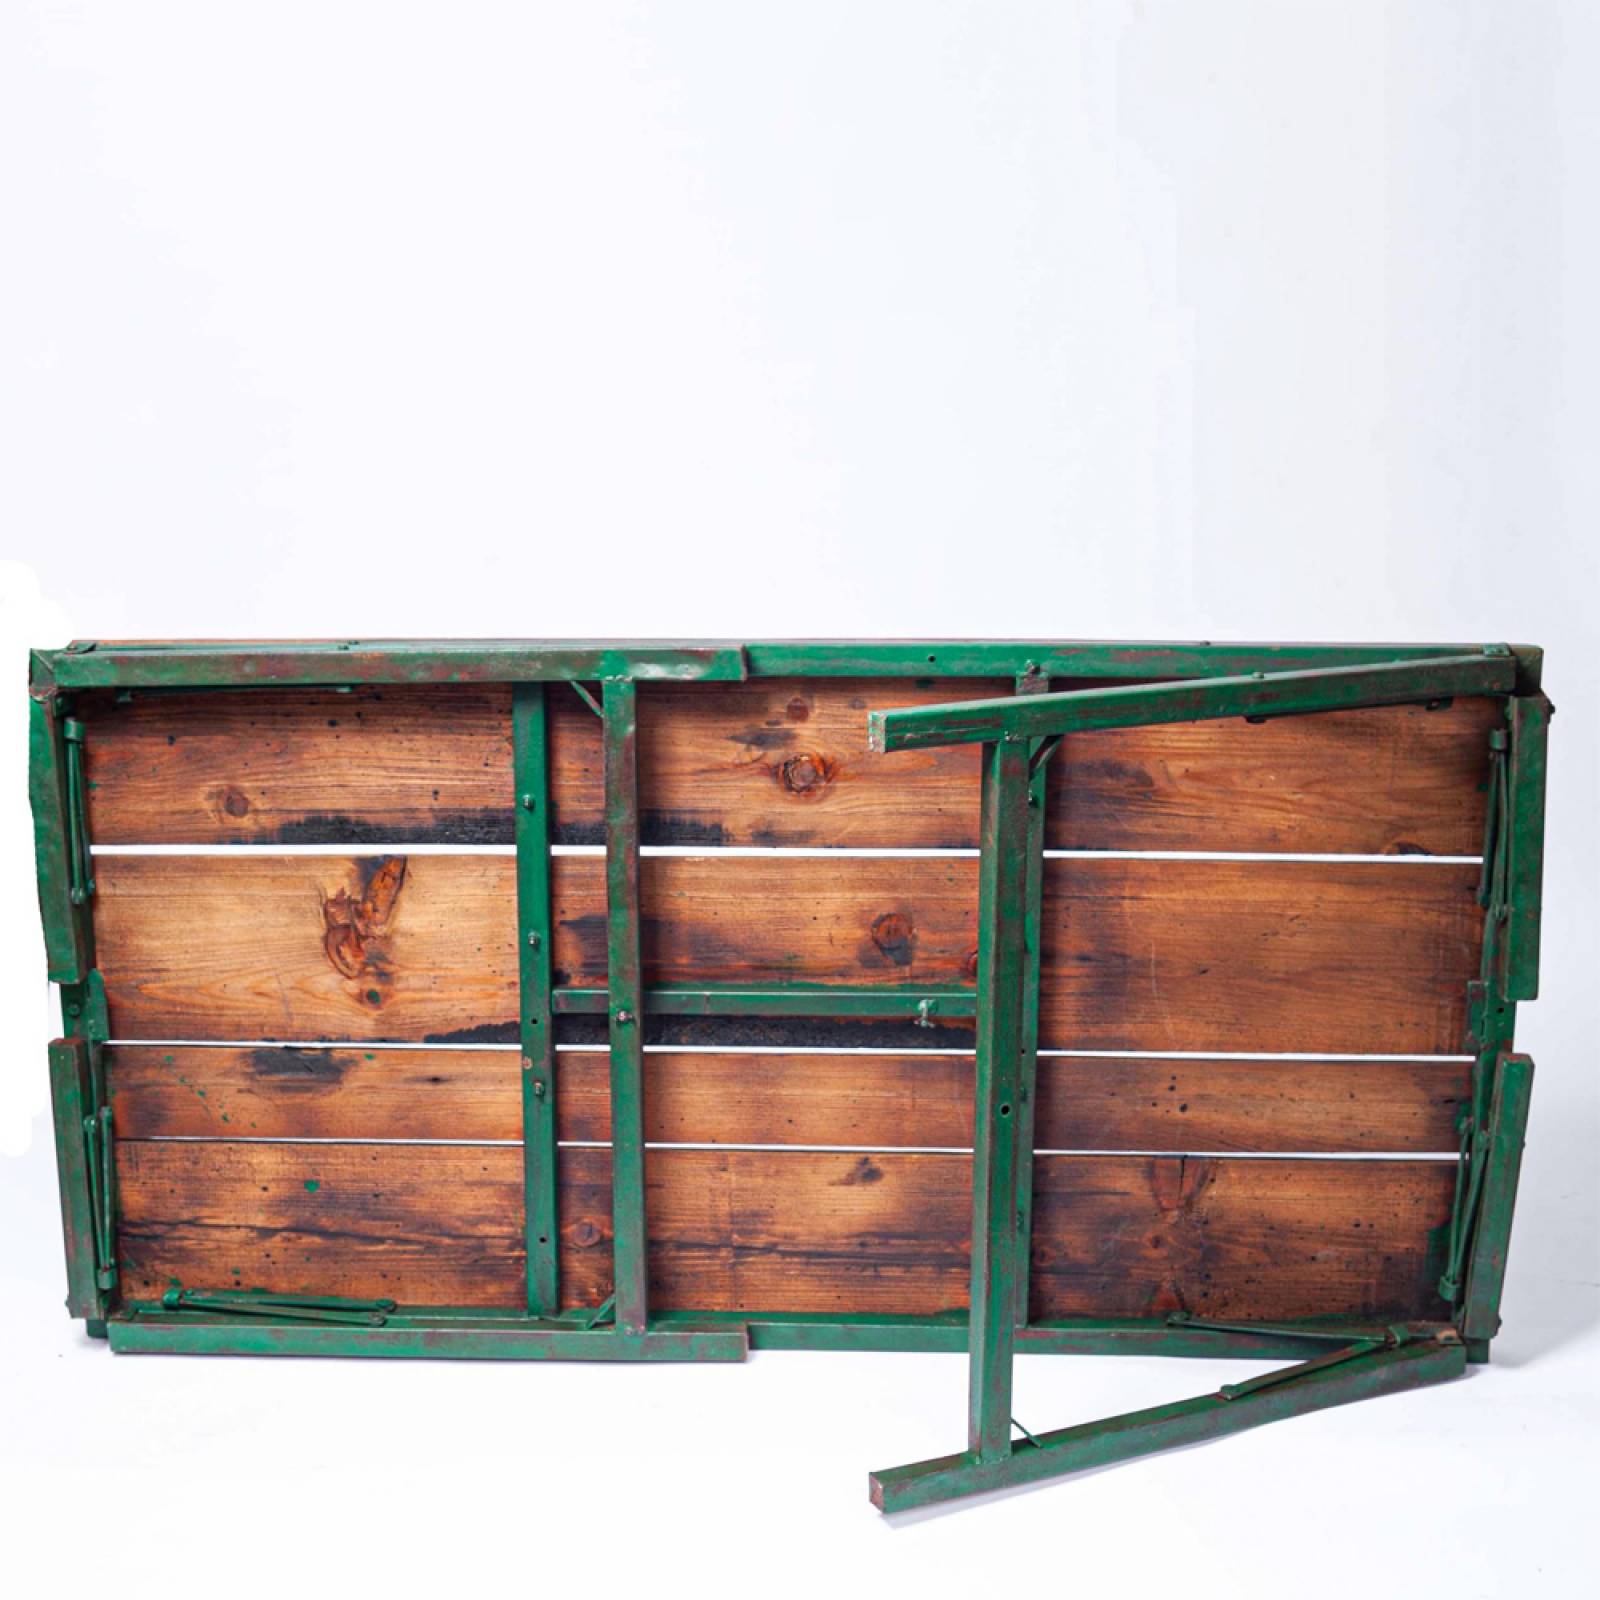 Ishan Reclaimed Folding Dining & Coffee Table thumbnails